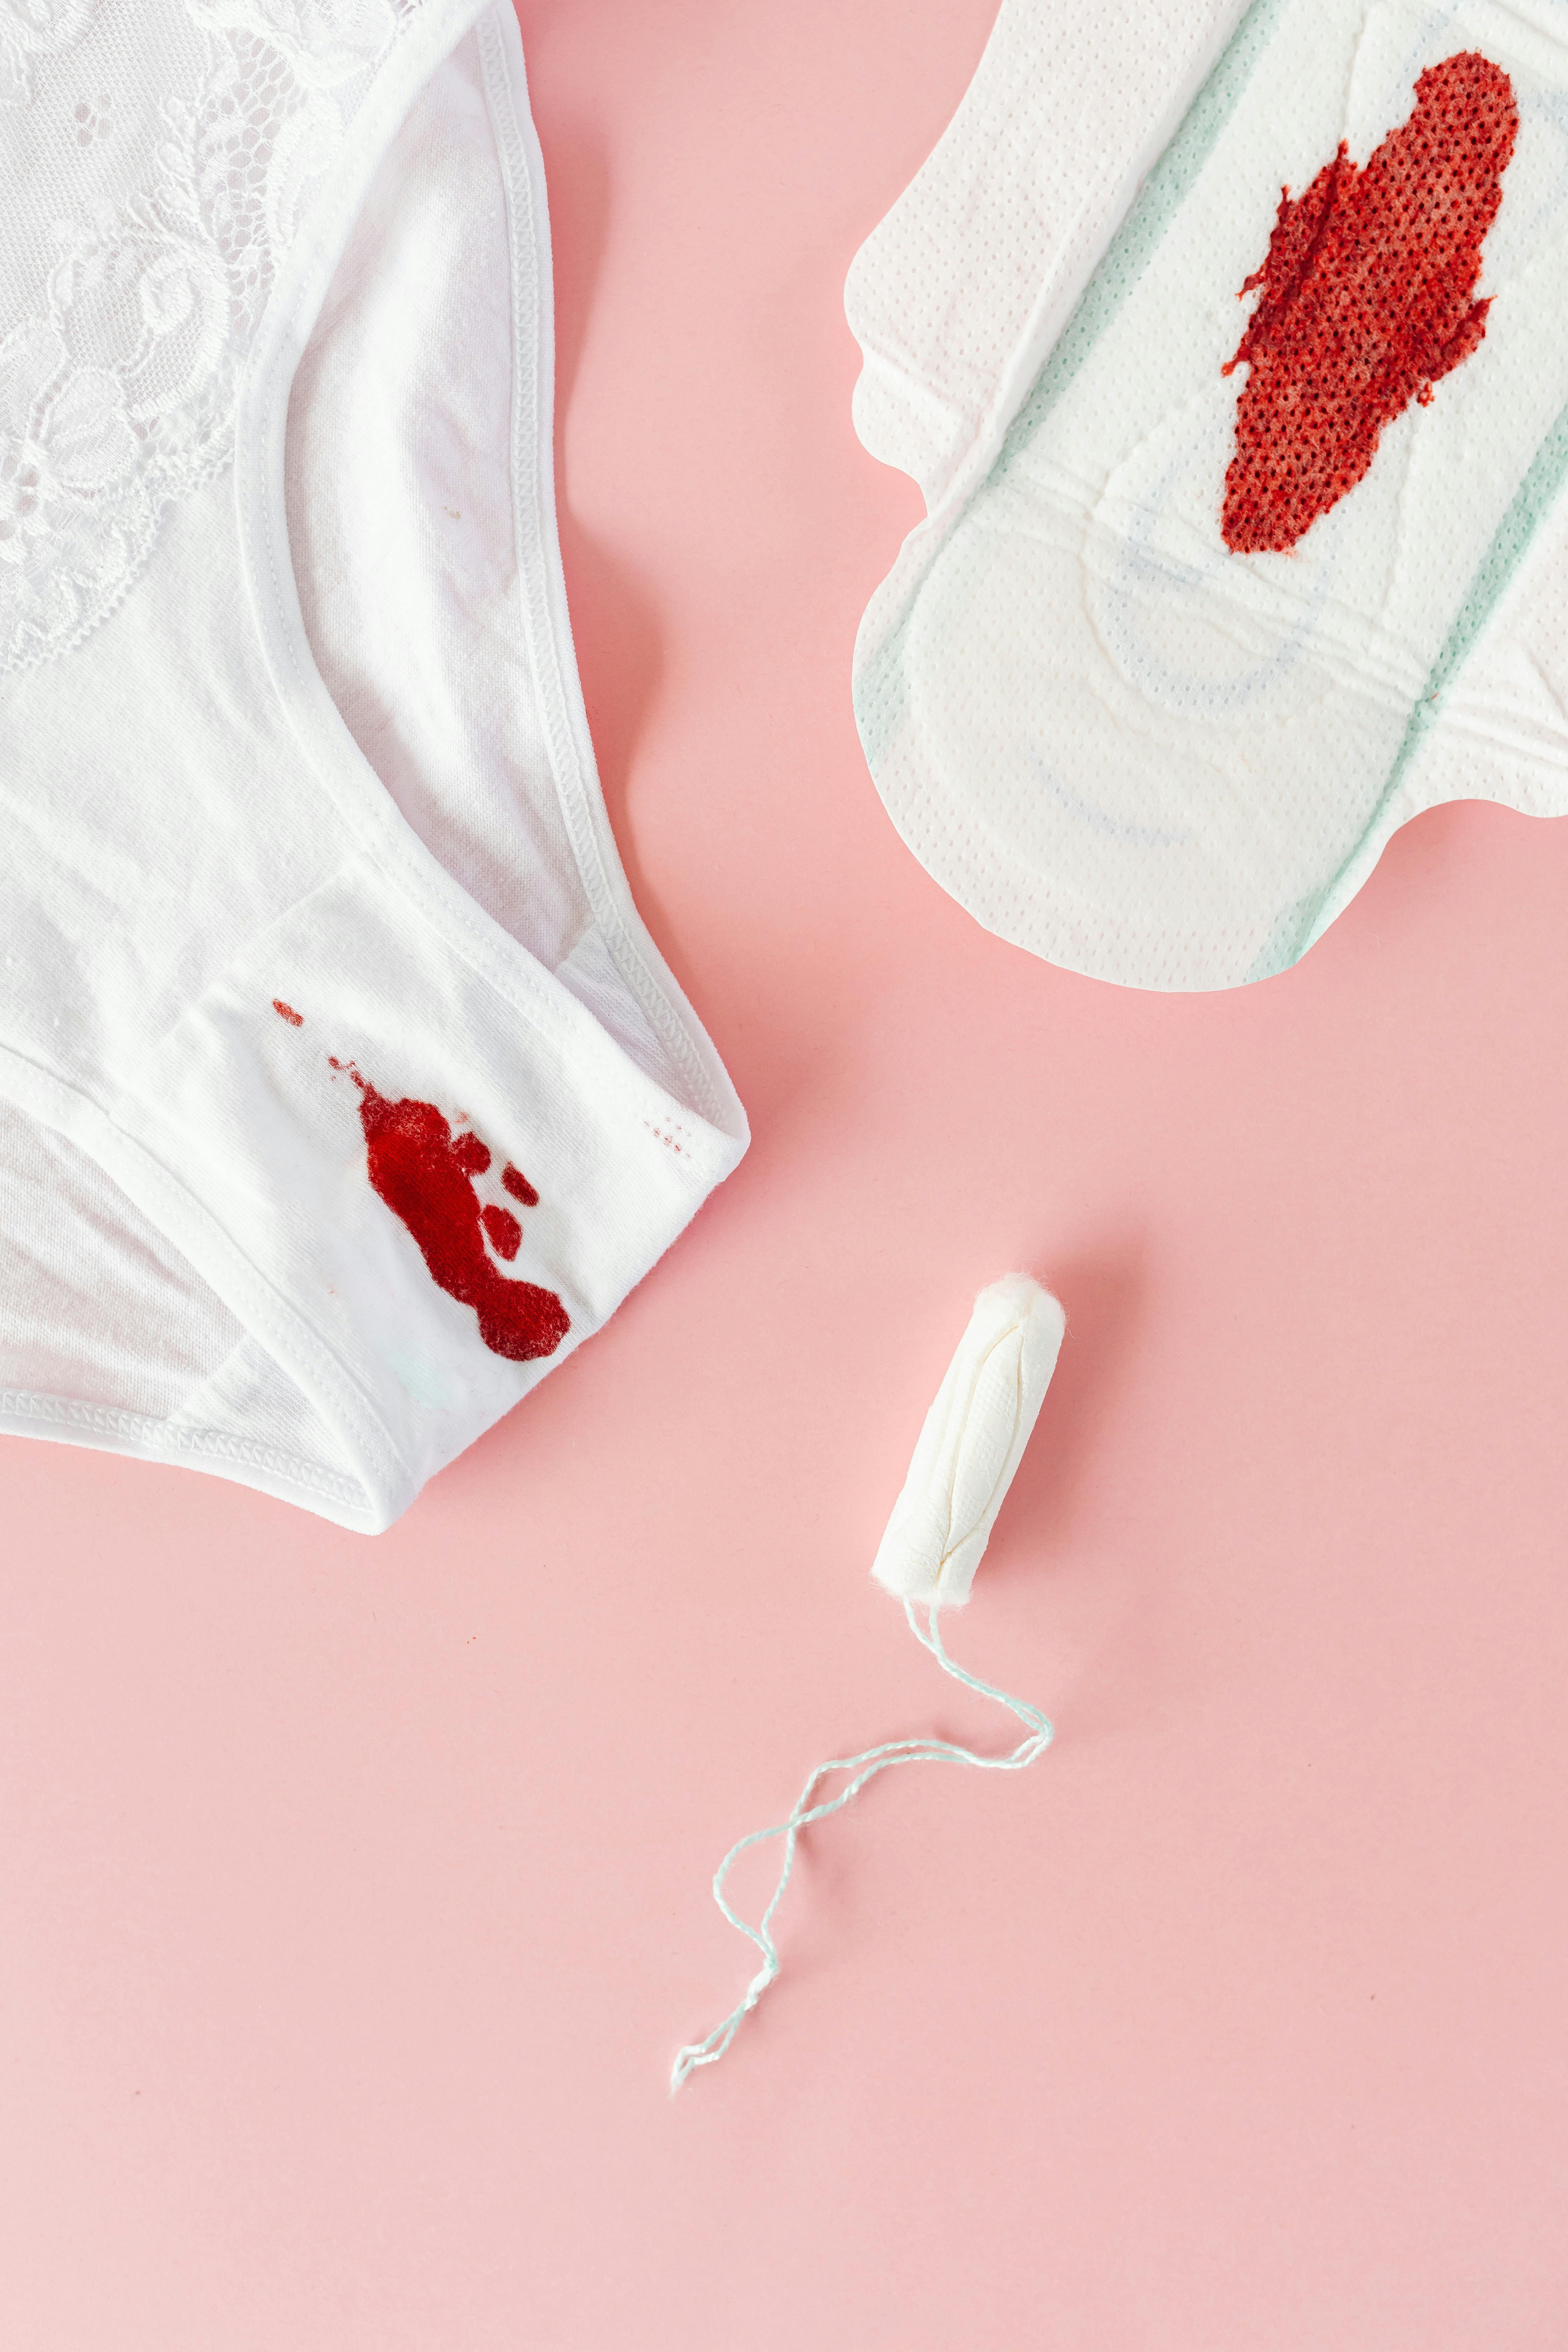 A Tampon beside an Underwear and a Napkin with Blood Stains · Free